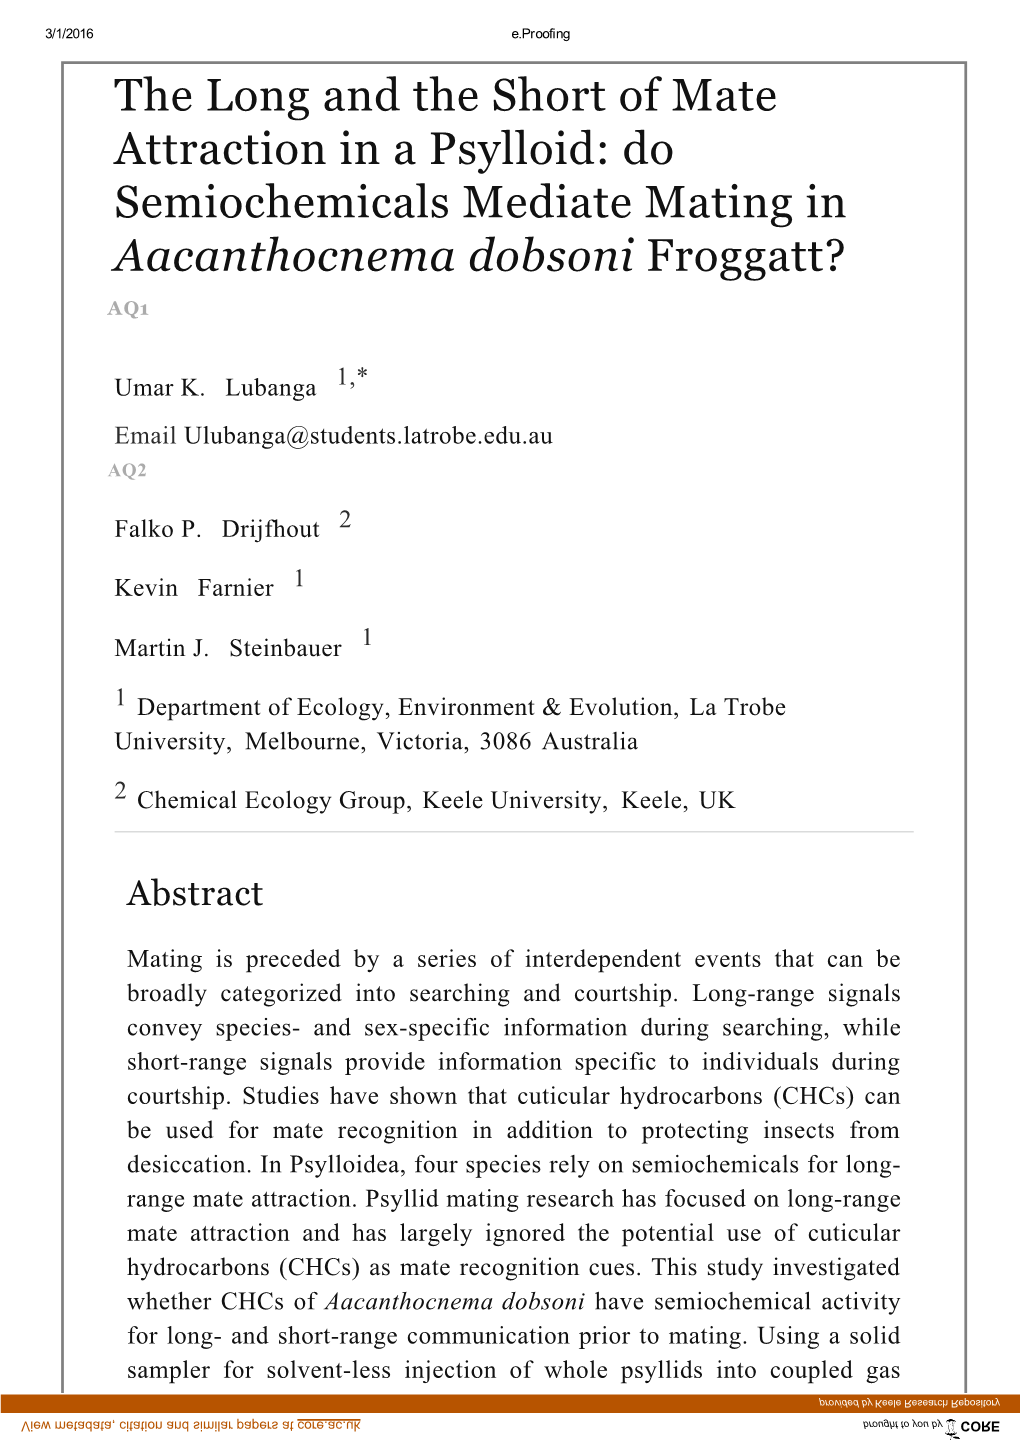 The Long and the Short of Mate Attraction in a Psylloid: Do Semiochemicals Mediate Mating in Aacanthocnema Dobsoni Froggatt? AQ1